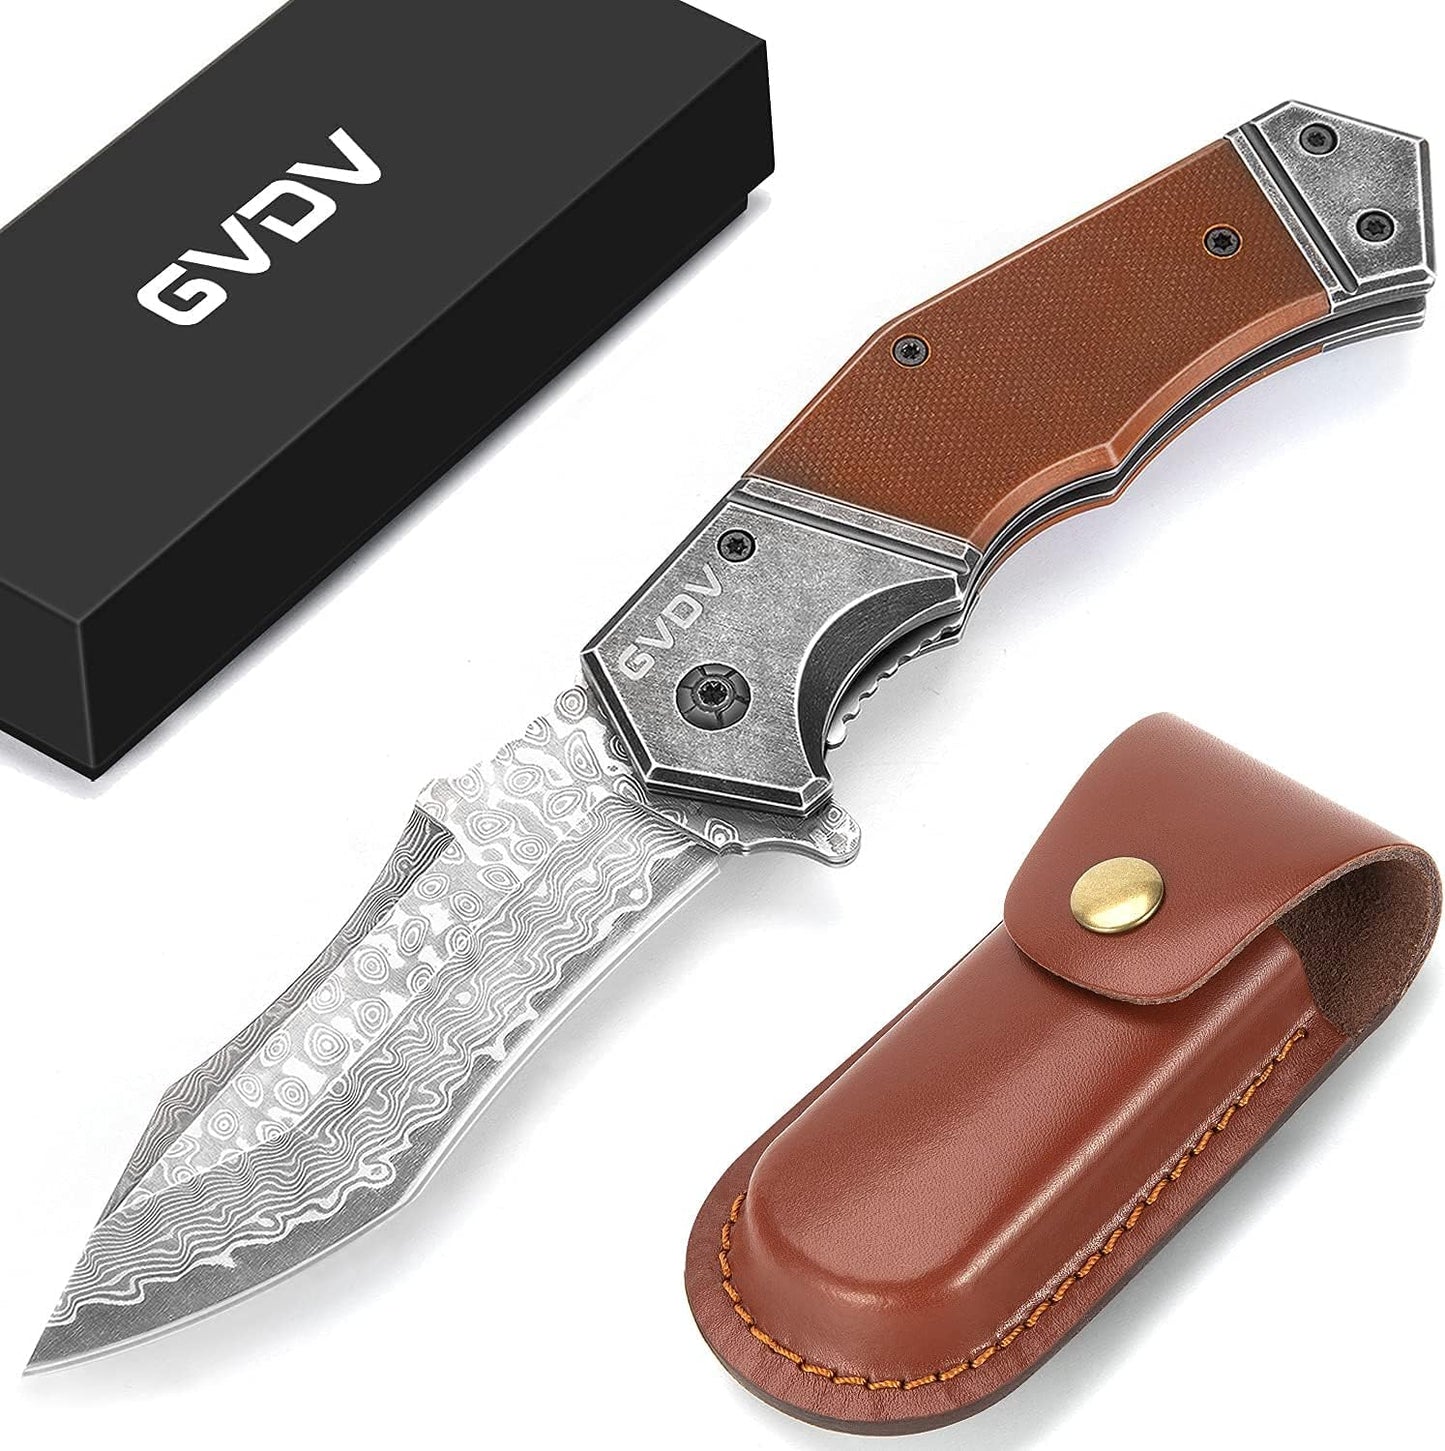 KD Pocket Knife Damascus Steel with G10 Handle with Leather Sheath